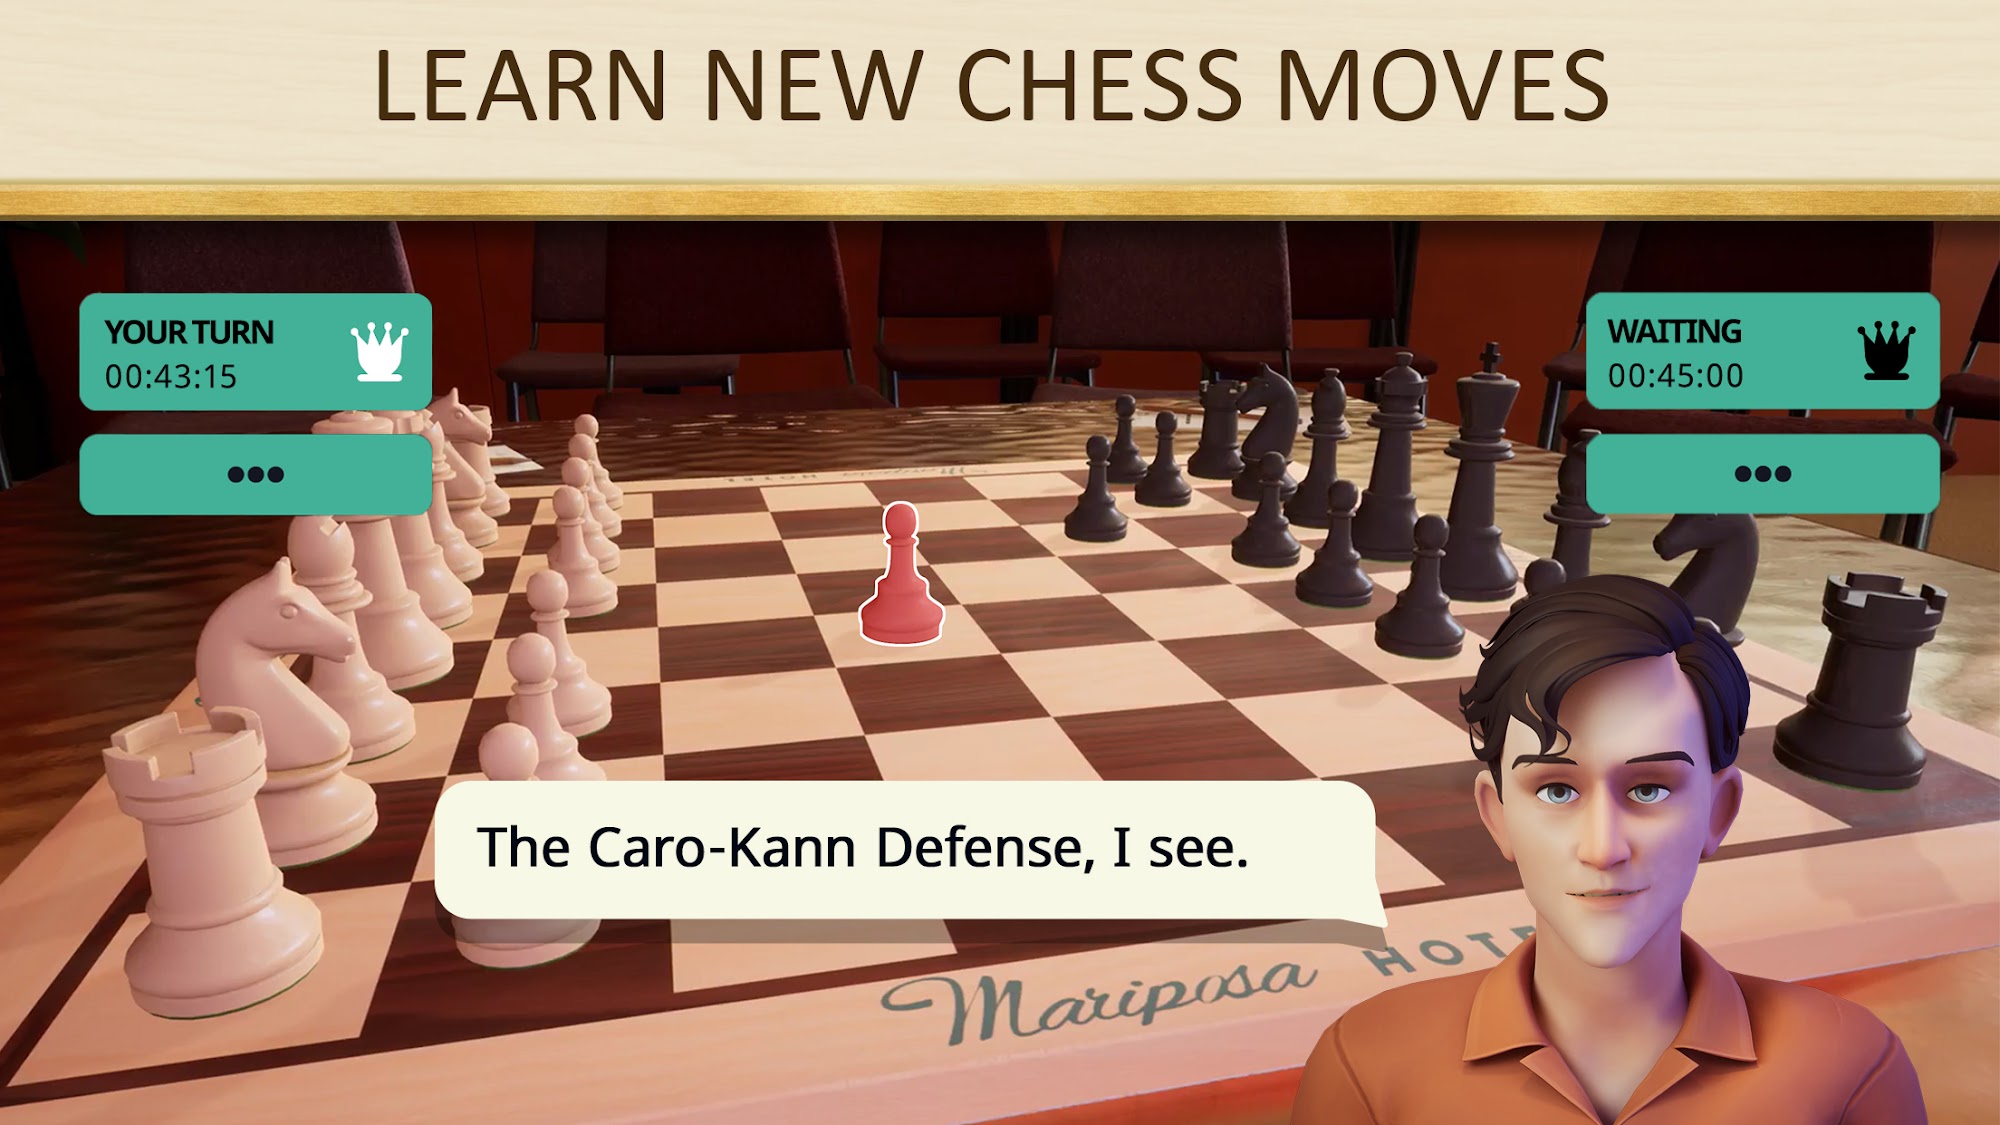 The Queen's Gambit Chess - Android game screenshots.